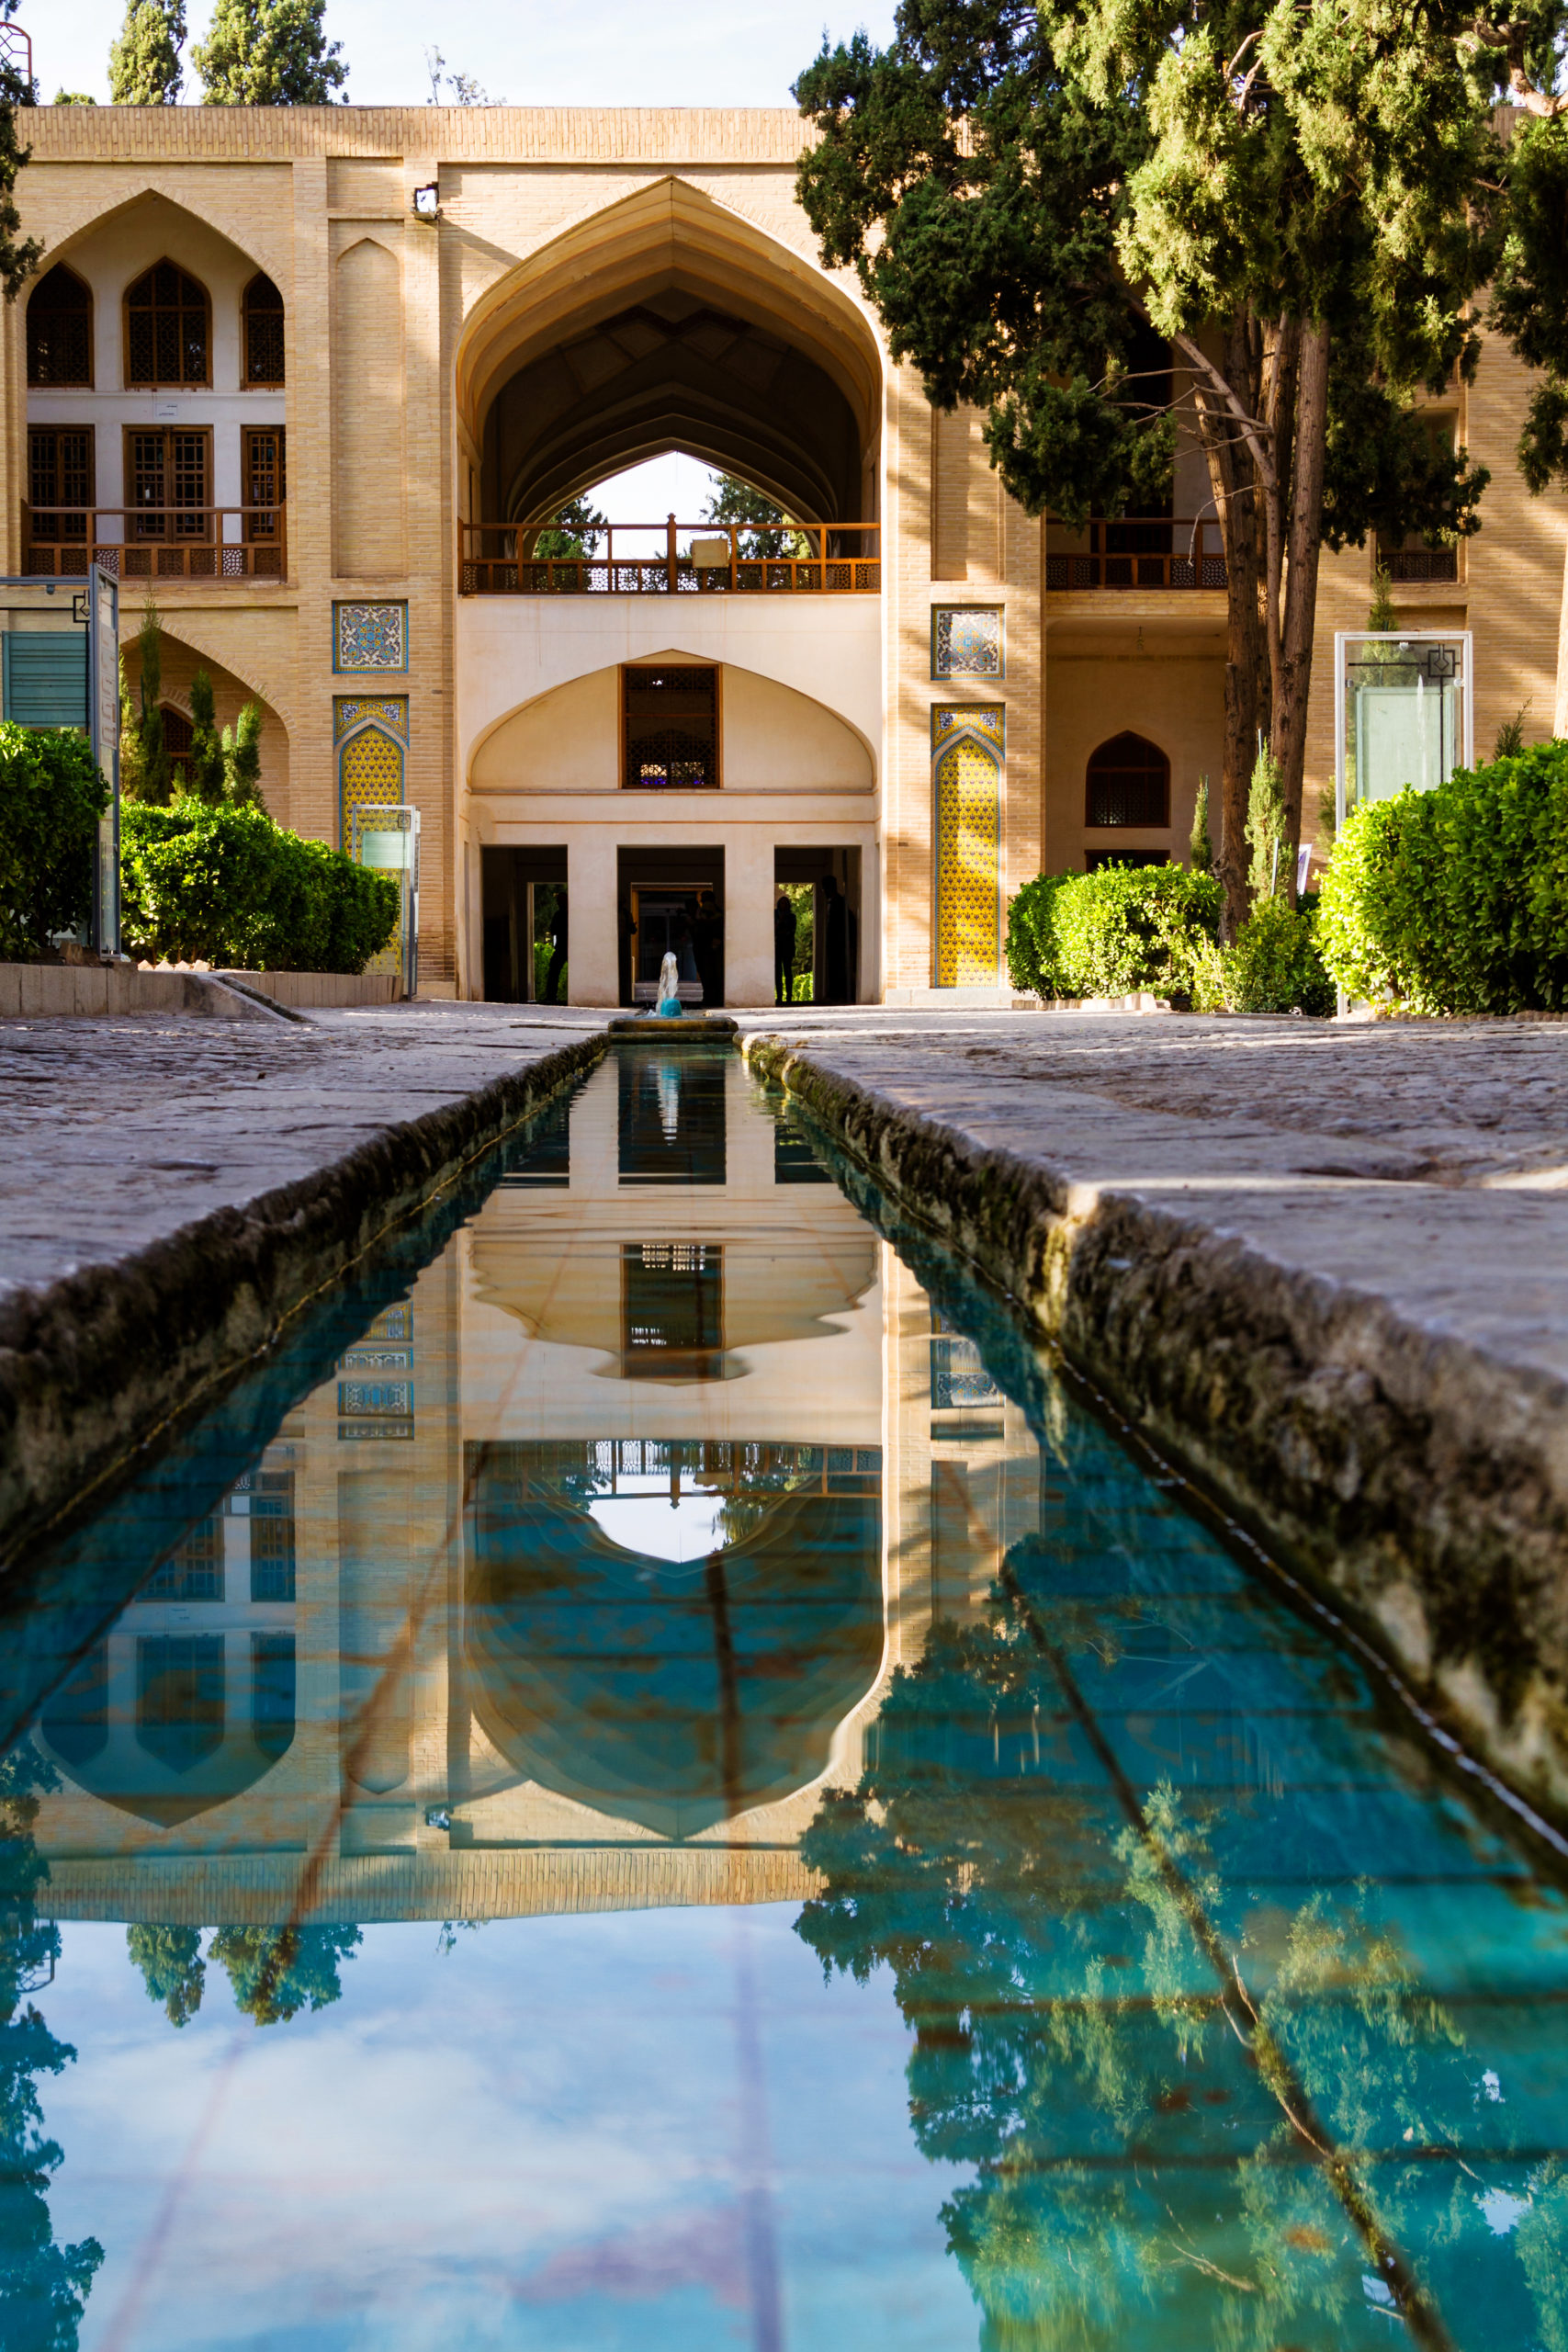 A tranquil reflecting pool mirroring the surrounding architecture and sky